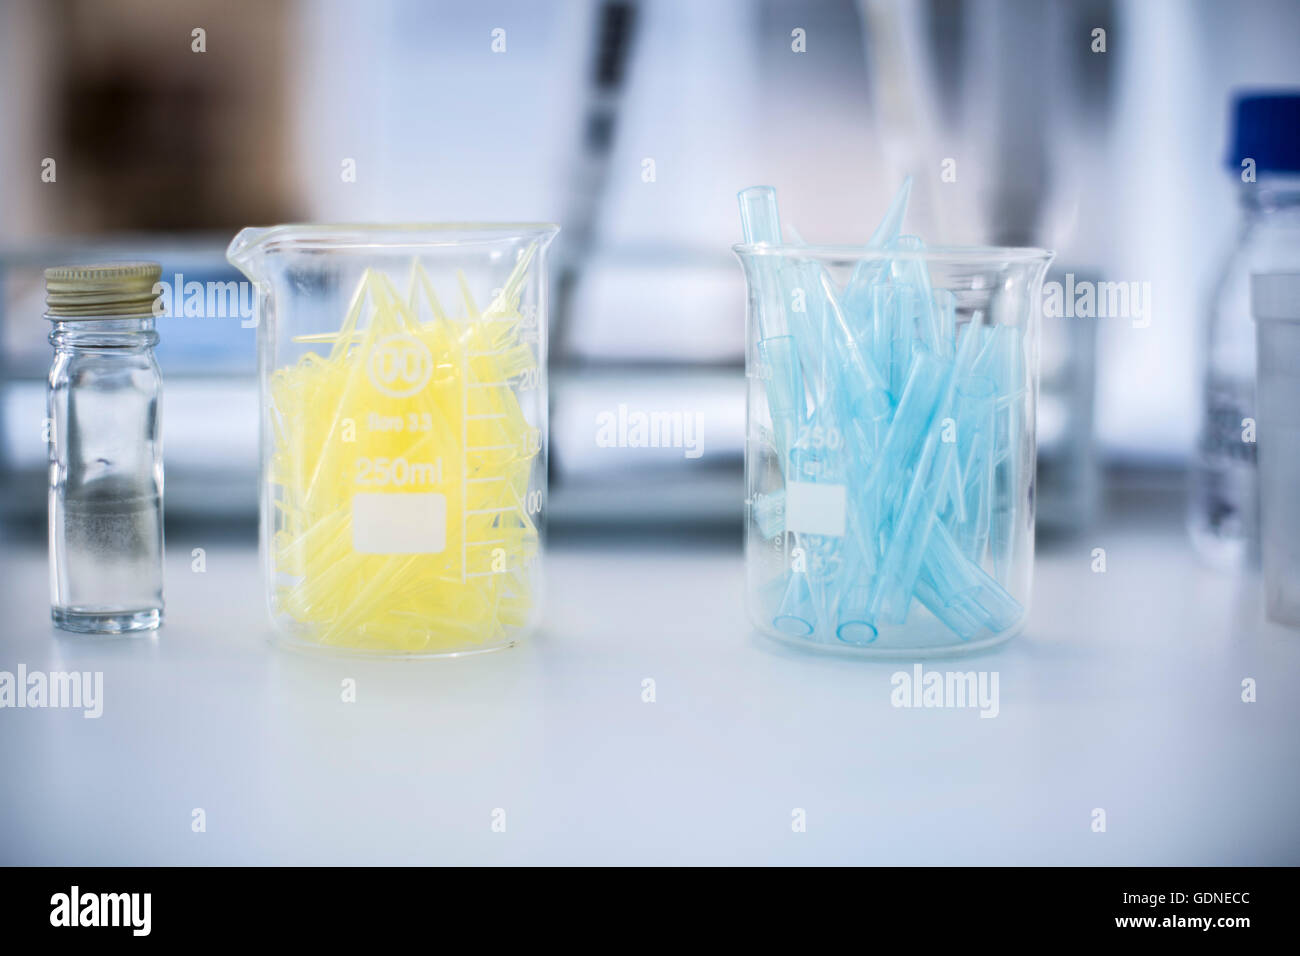 Glass beakers filled with test tubes, still life, close-up Stock Photo